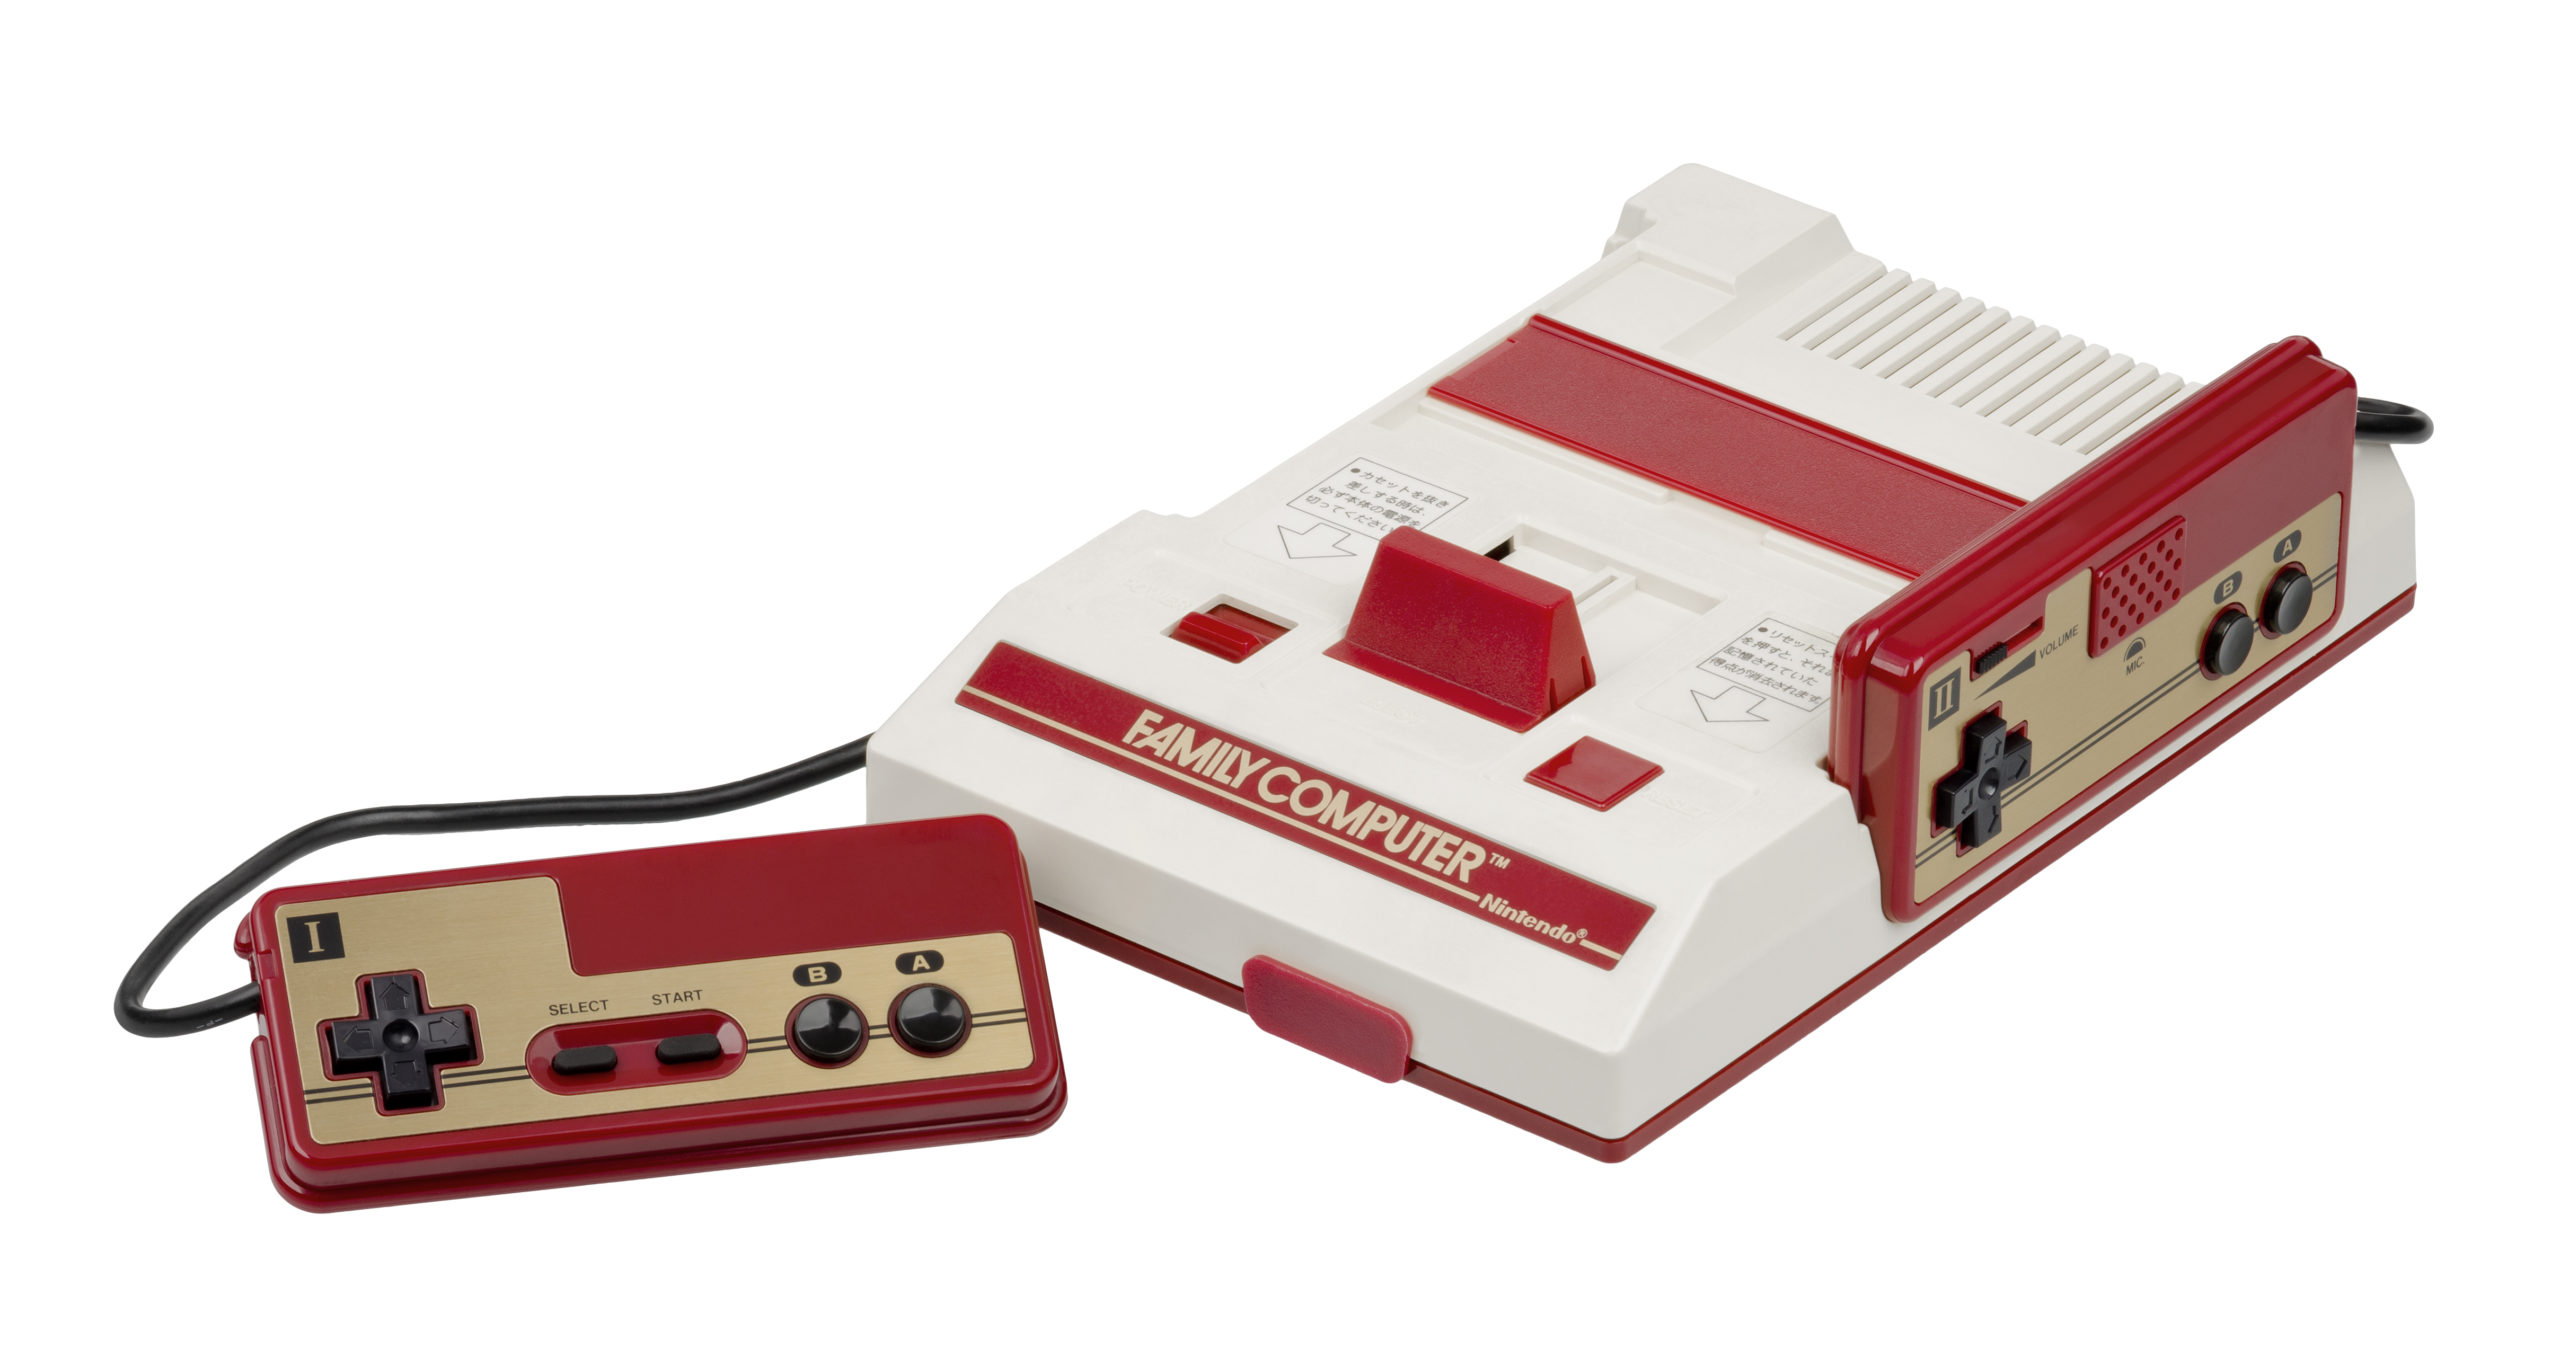 The Designer Of The NES Dishes The Dirt On Nintendo’s Early Days